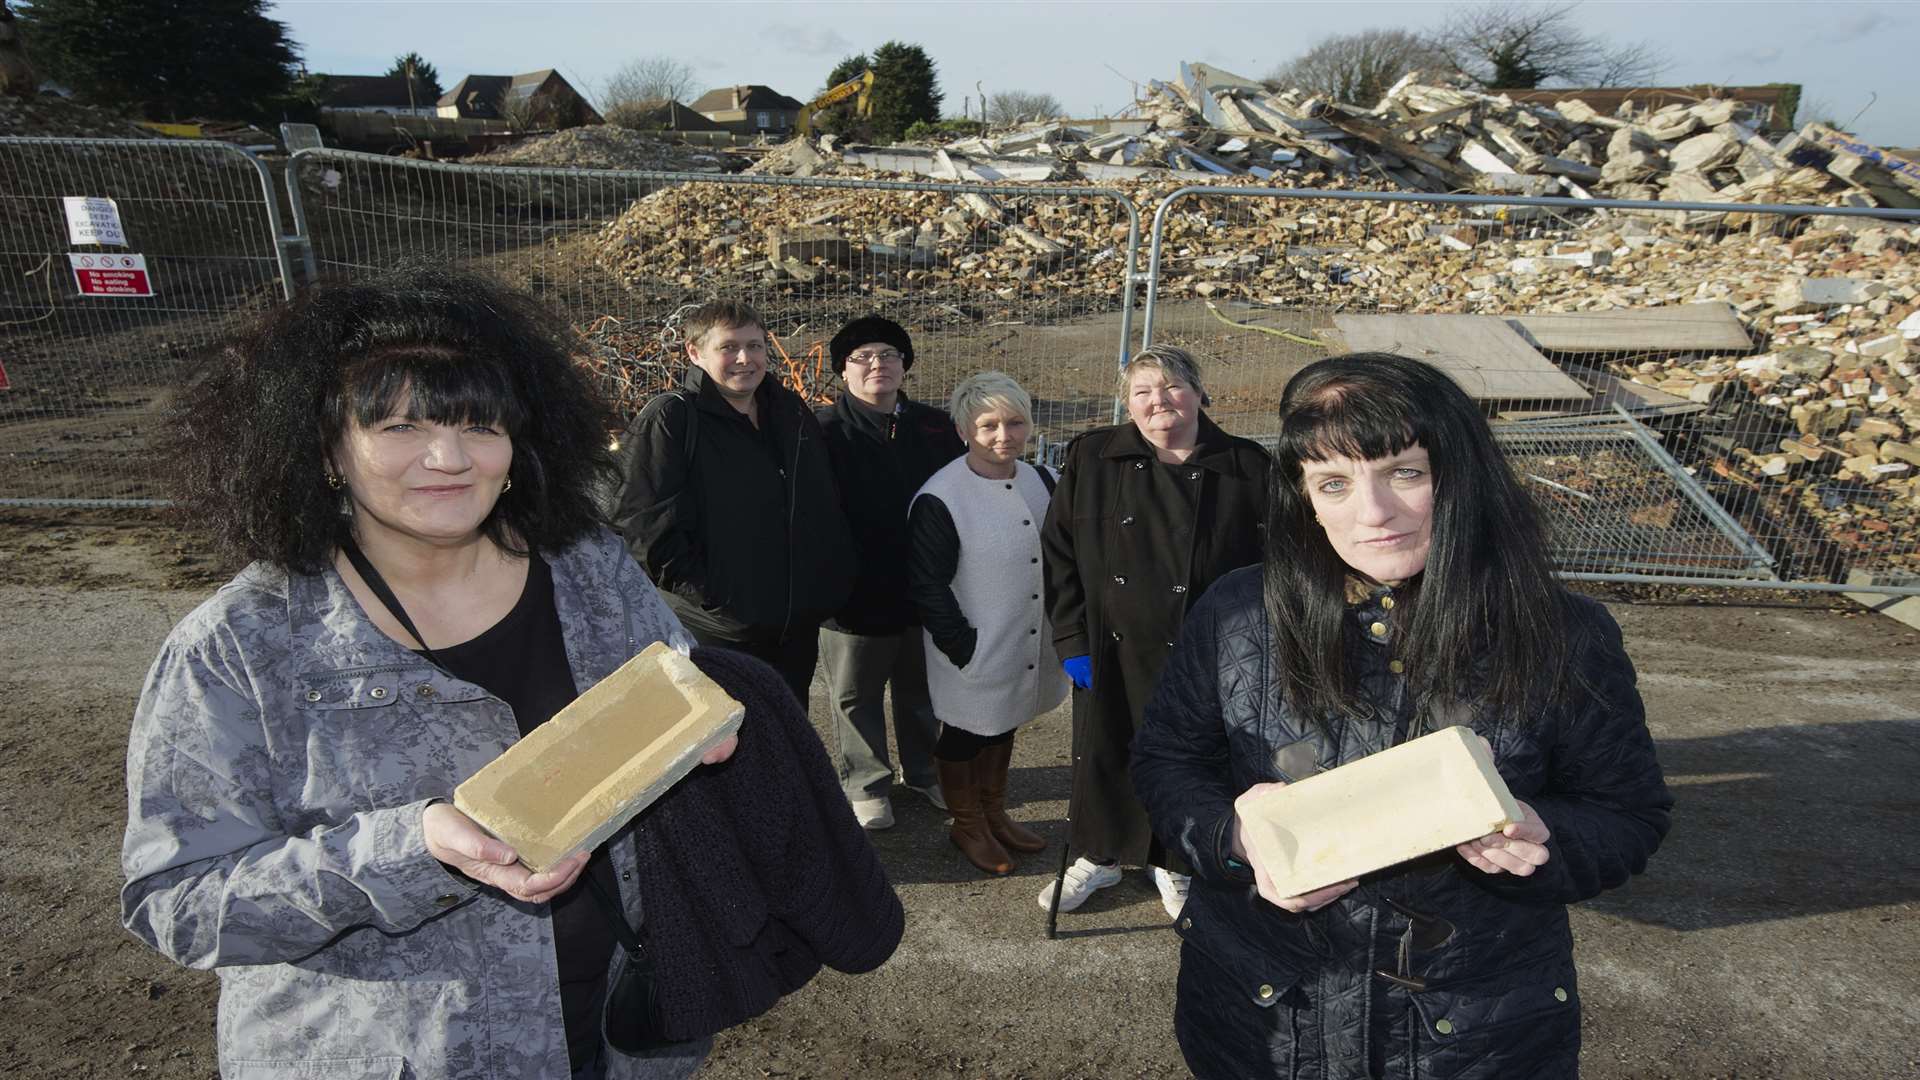 Linda Russell, left, and Sandra Russell, right, with bricks from the school, with from left, Michelle Milford, Jane Lee, Sharne Randall and Marie Burdett behind. Former pupils of the Chapter School